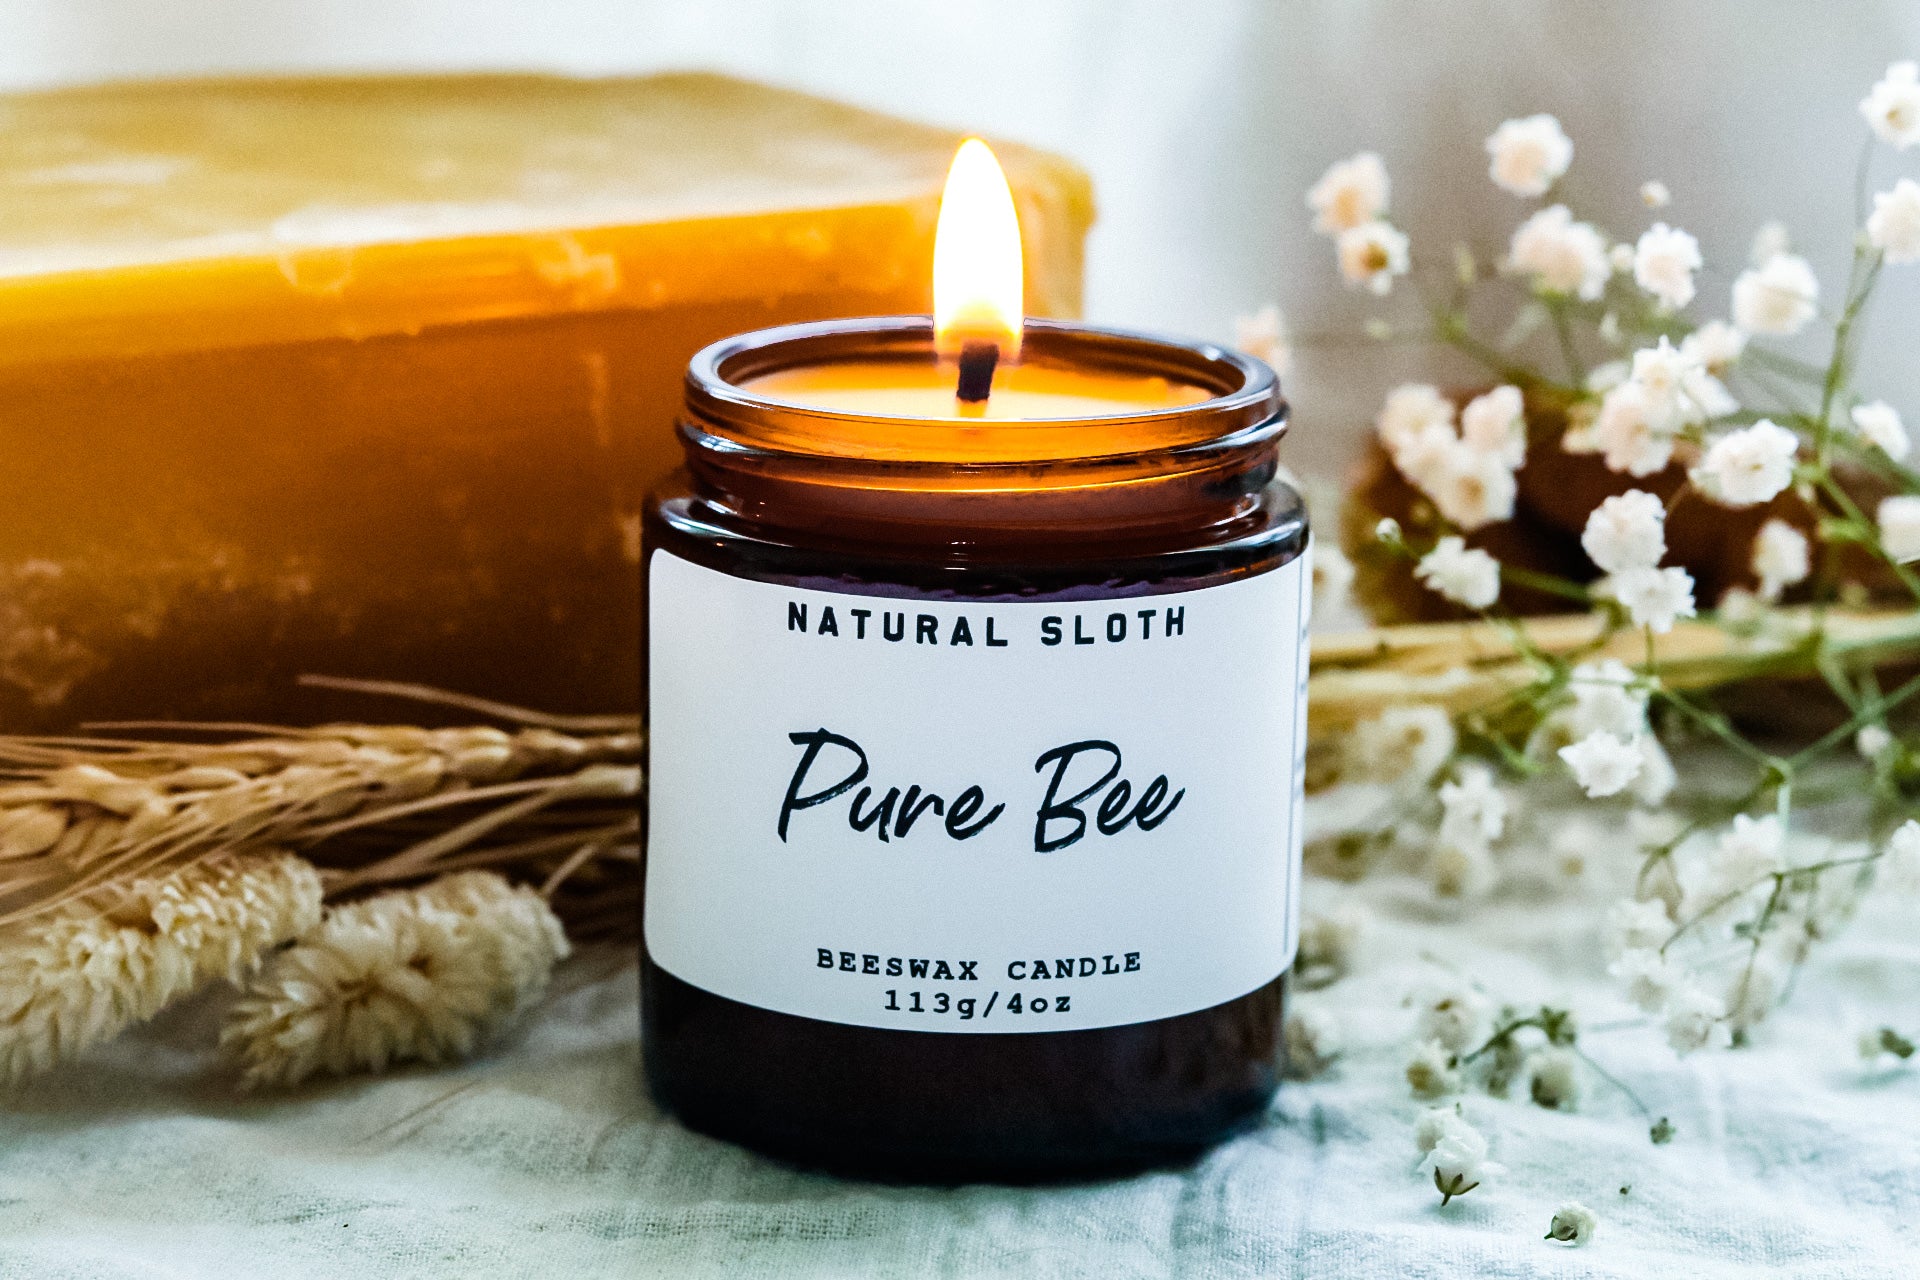 Pure Bee Beeswax Candles